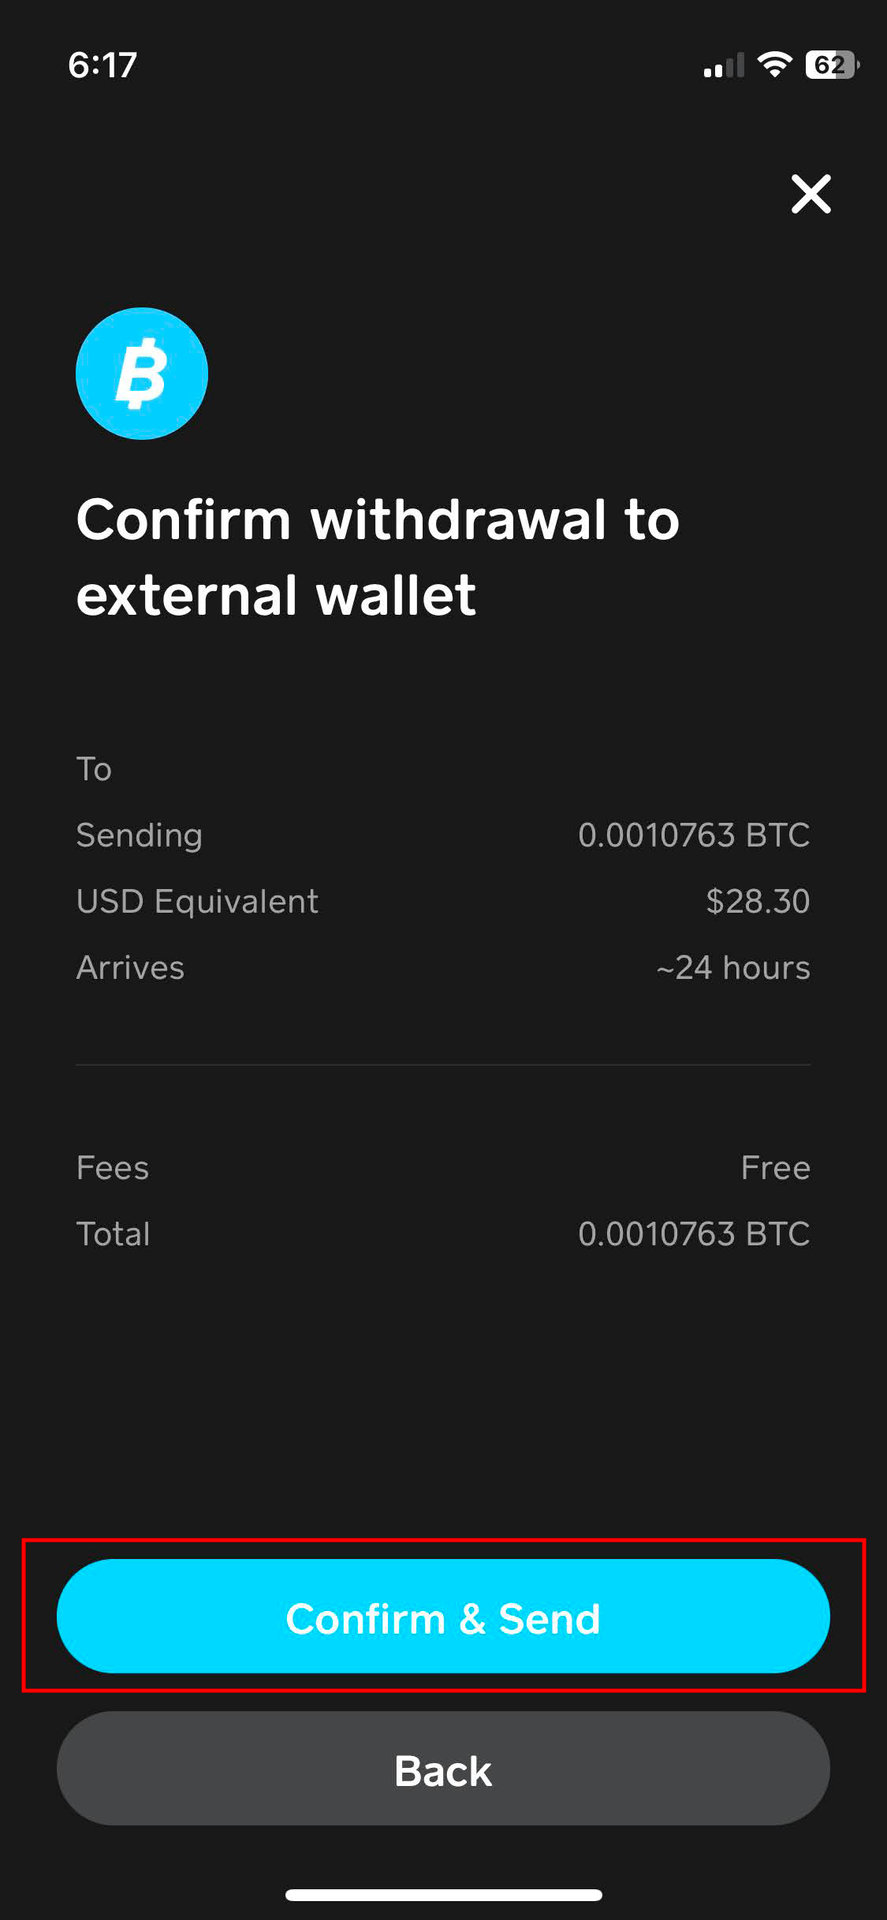 Step 2: Get Your Bitcoin Wallet Address